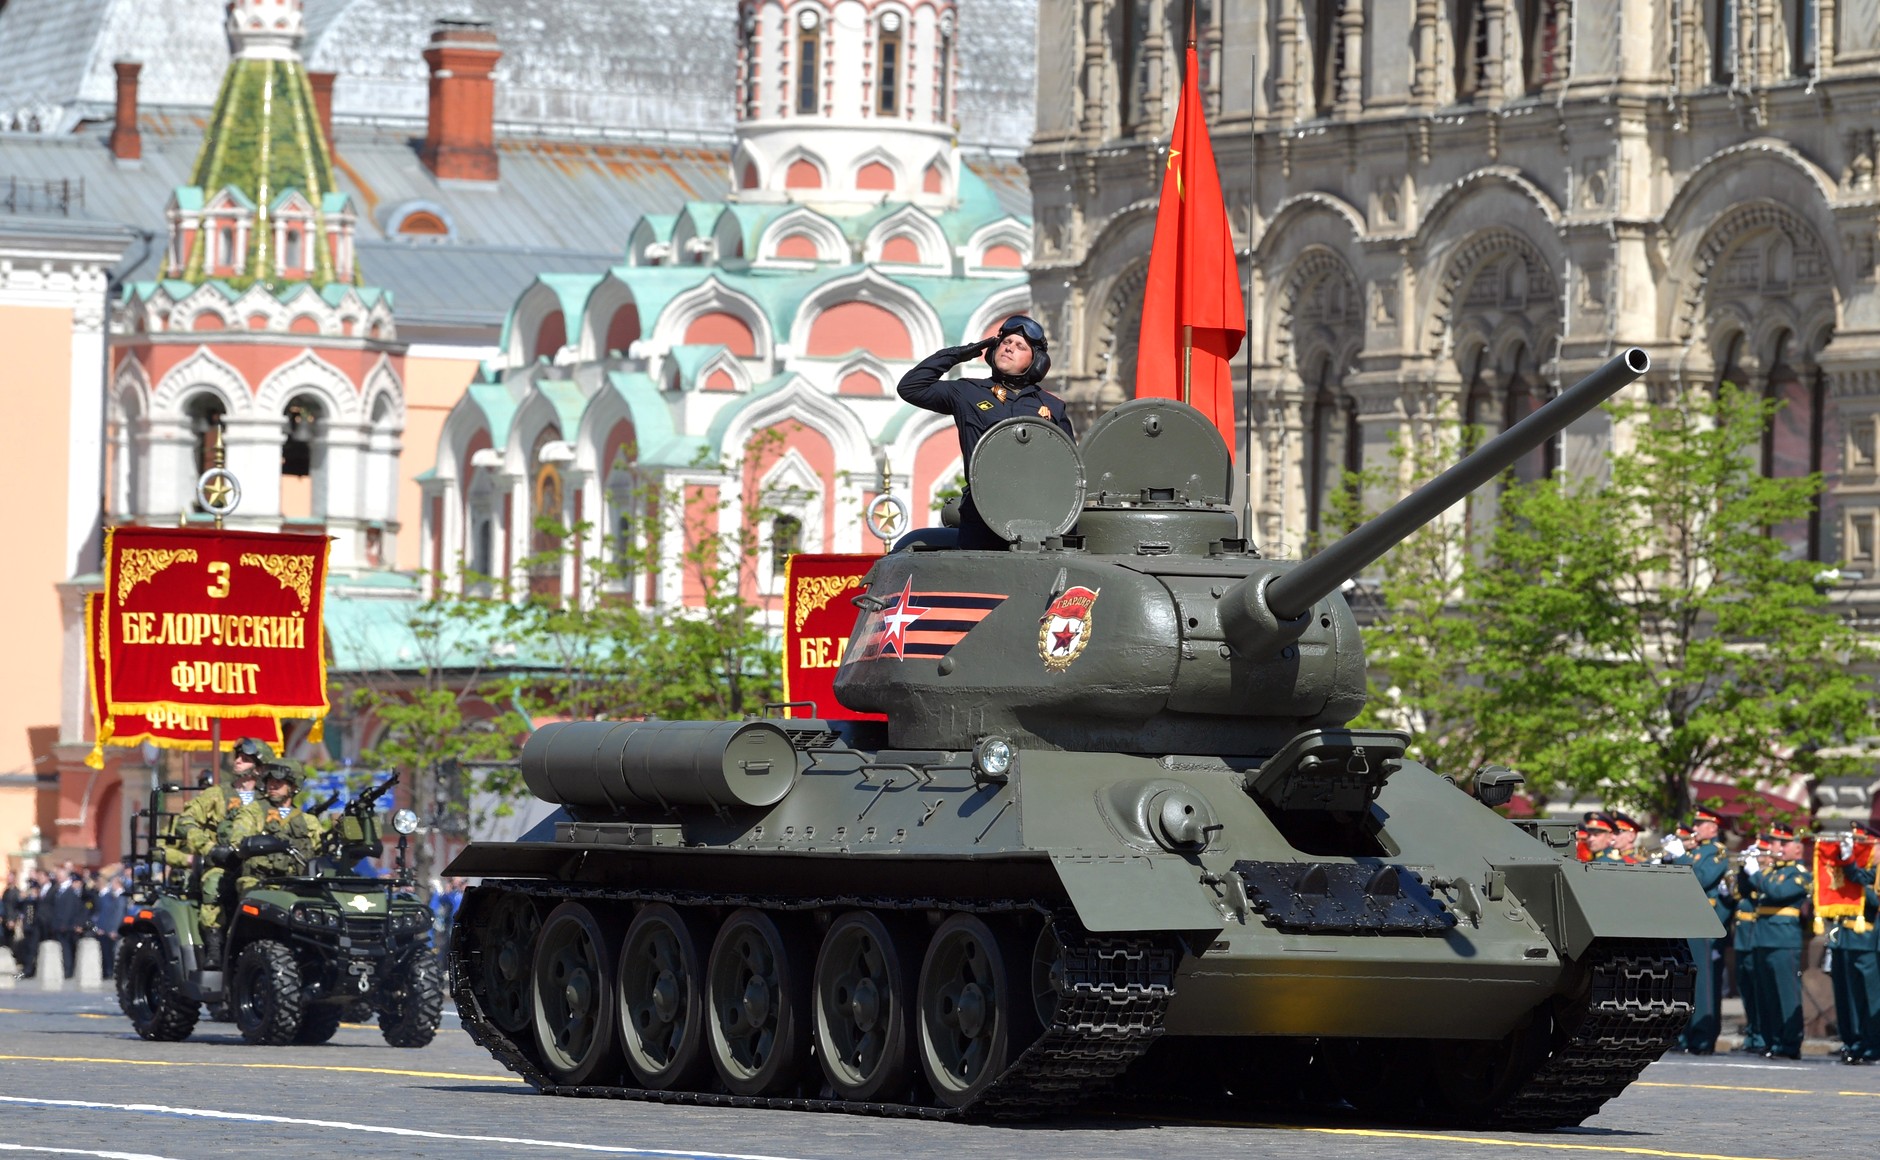 Archivbild: "File:2018 Moscow Victory Day Parade 46.jpg" by The Presidential Press and Information Office is licensed under CC BY 4.0.